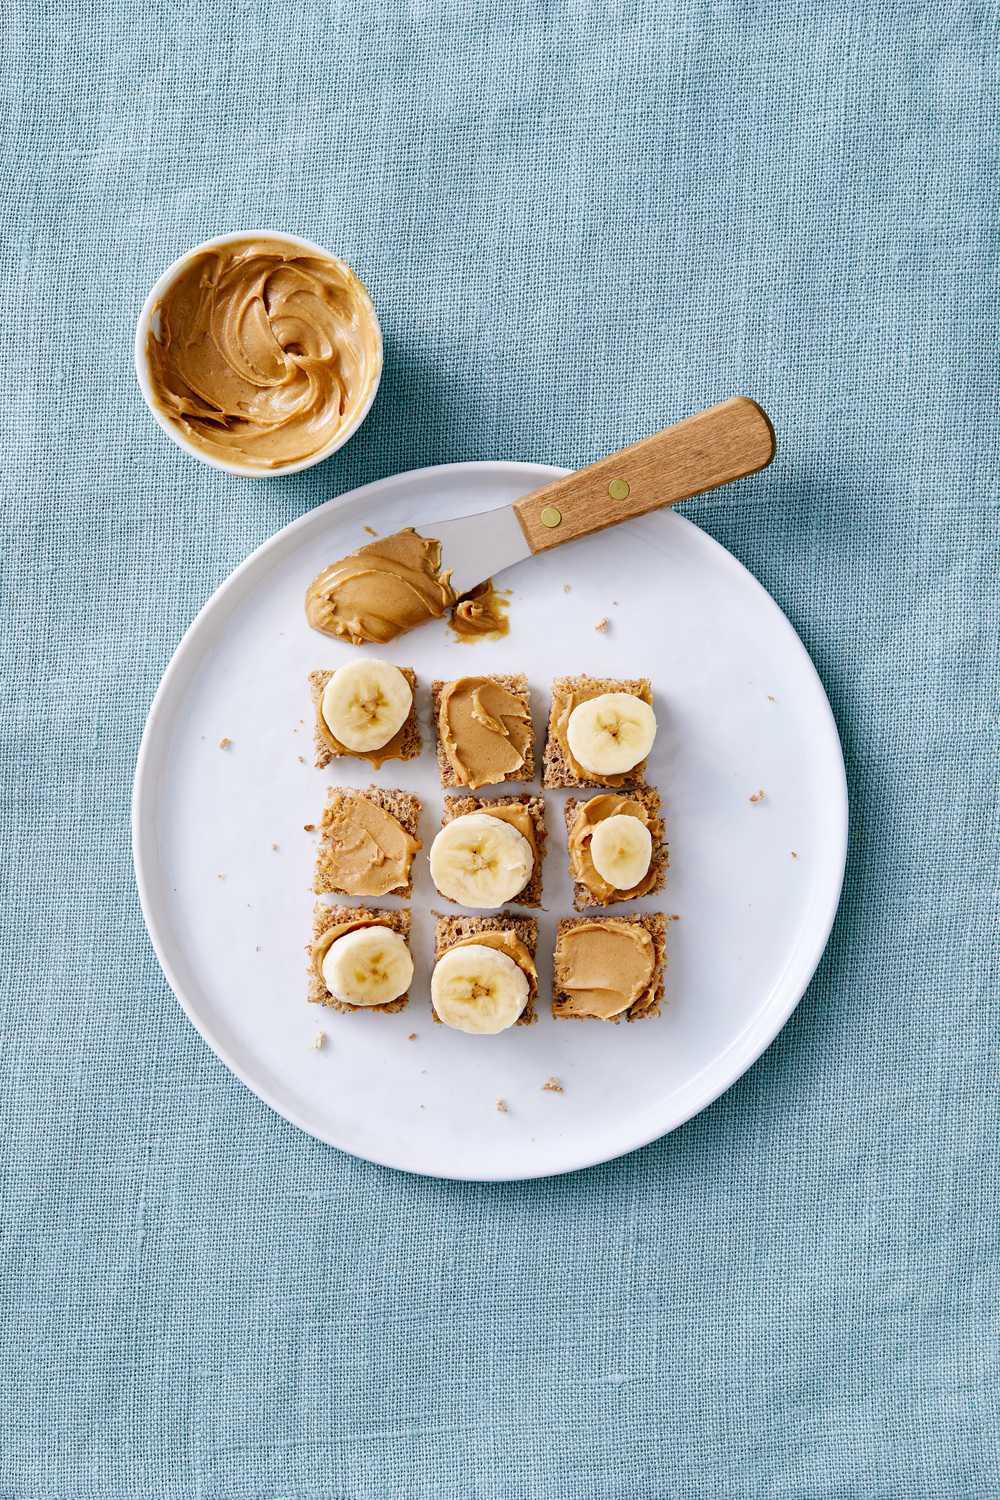 nut butter and banana stackers toddler meal